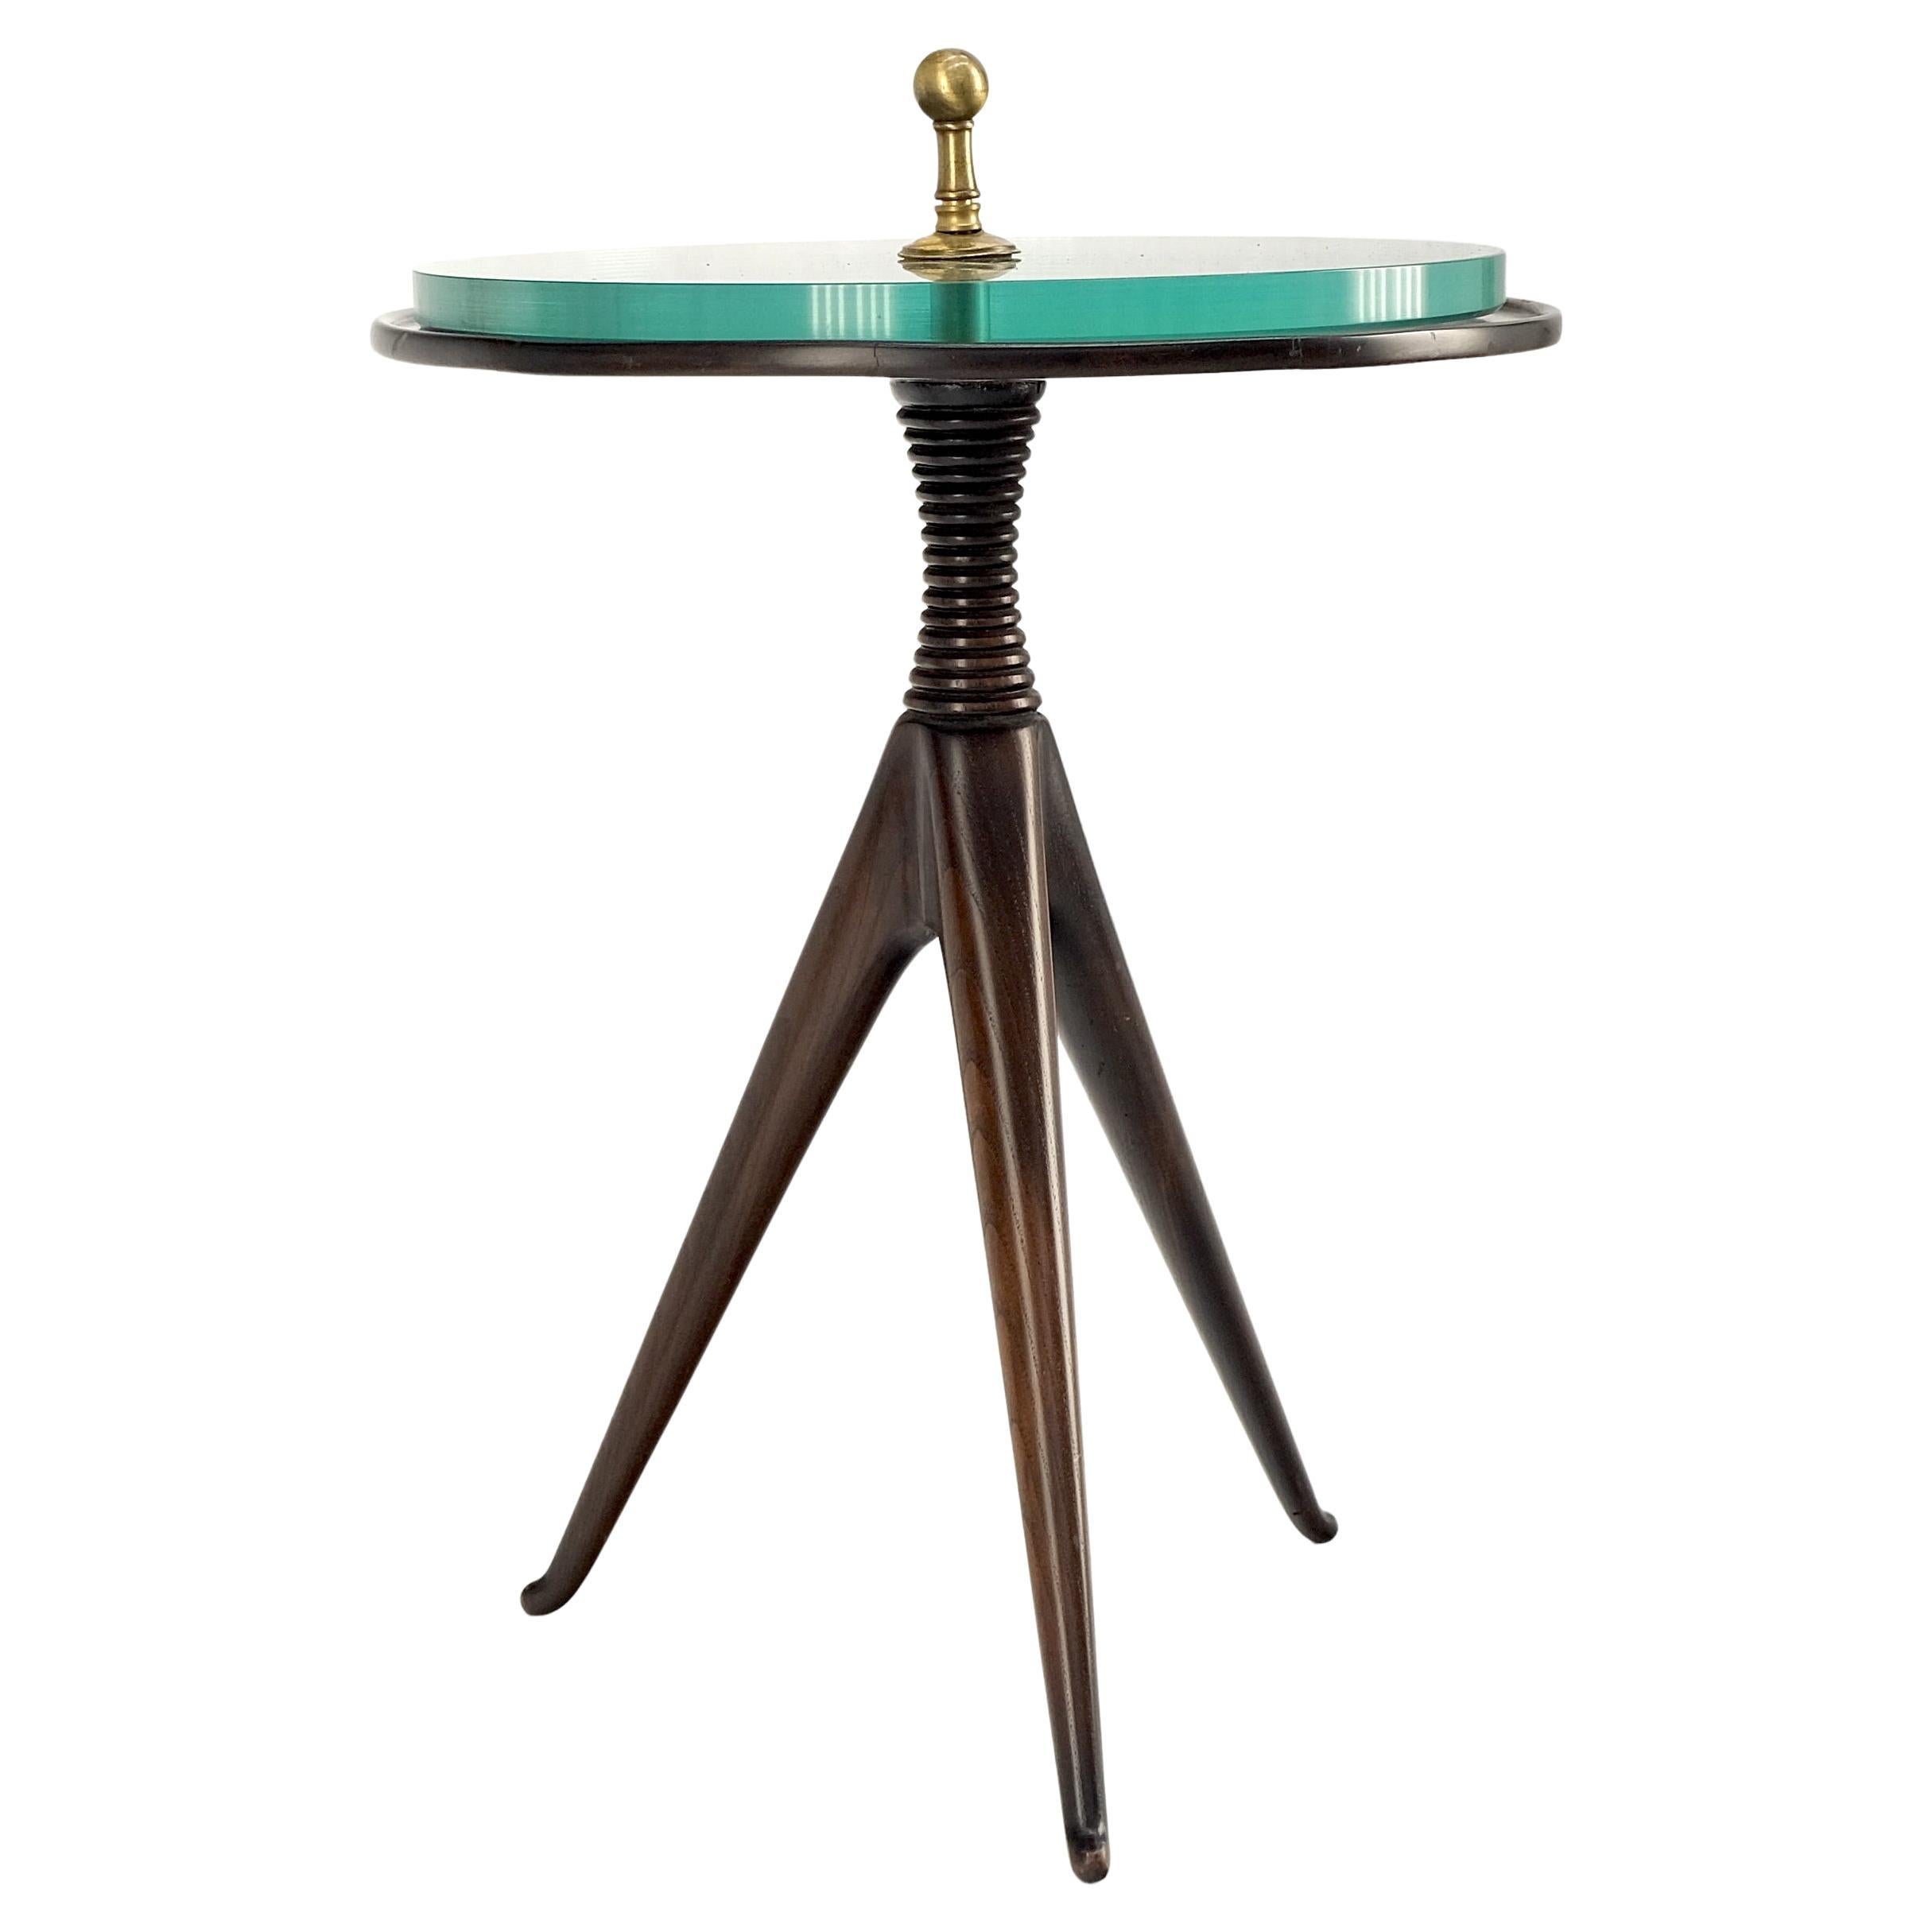 Tripod Legs Base Thick Glass Top Round Butler Serving Side End Table Stand MINT! im Zustand „Gut“ im Angebot in Rockaway, NJ